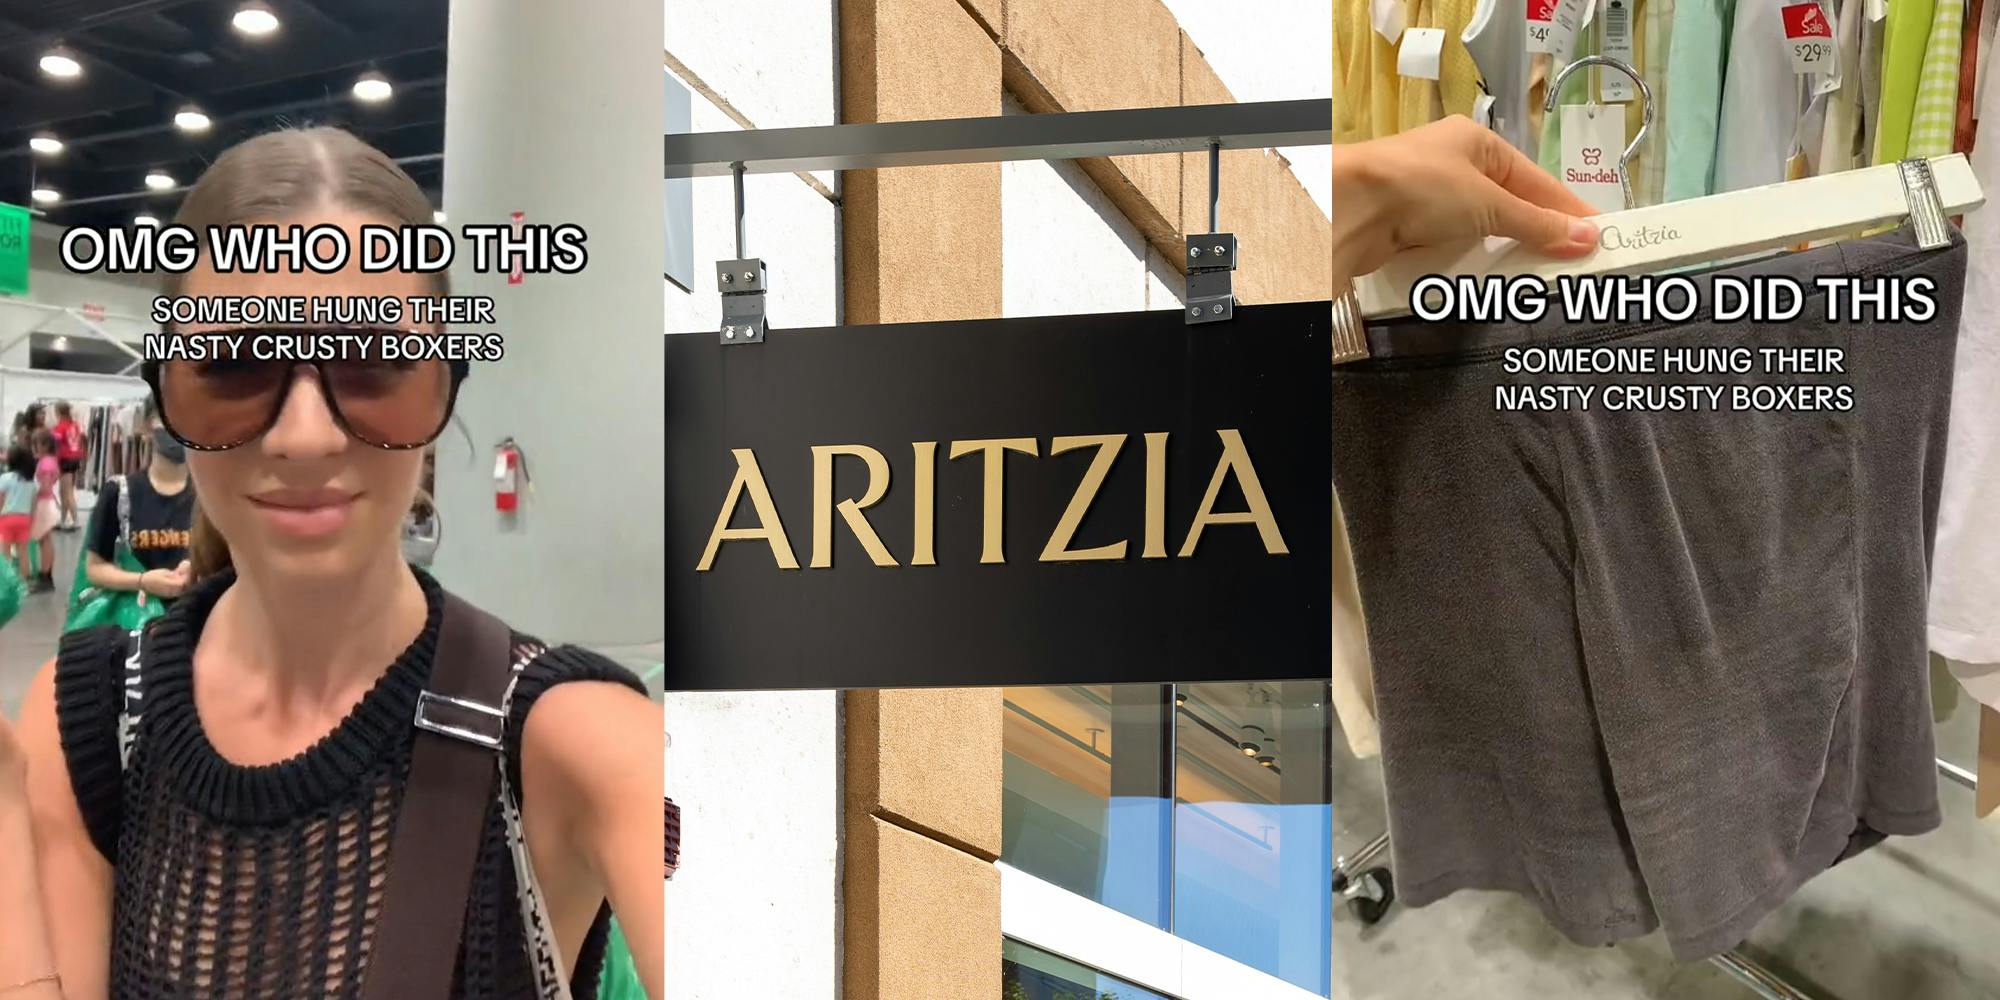 A Massive Aritzia Sale Is On Now & There Are So Many Items For